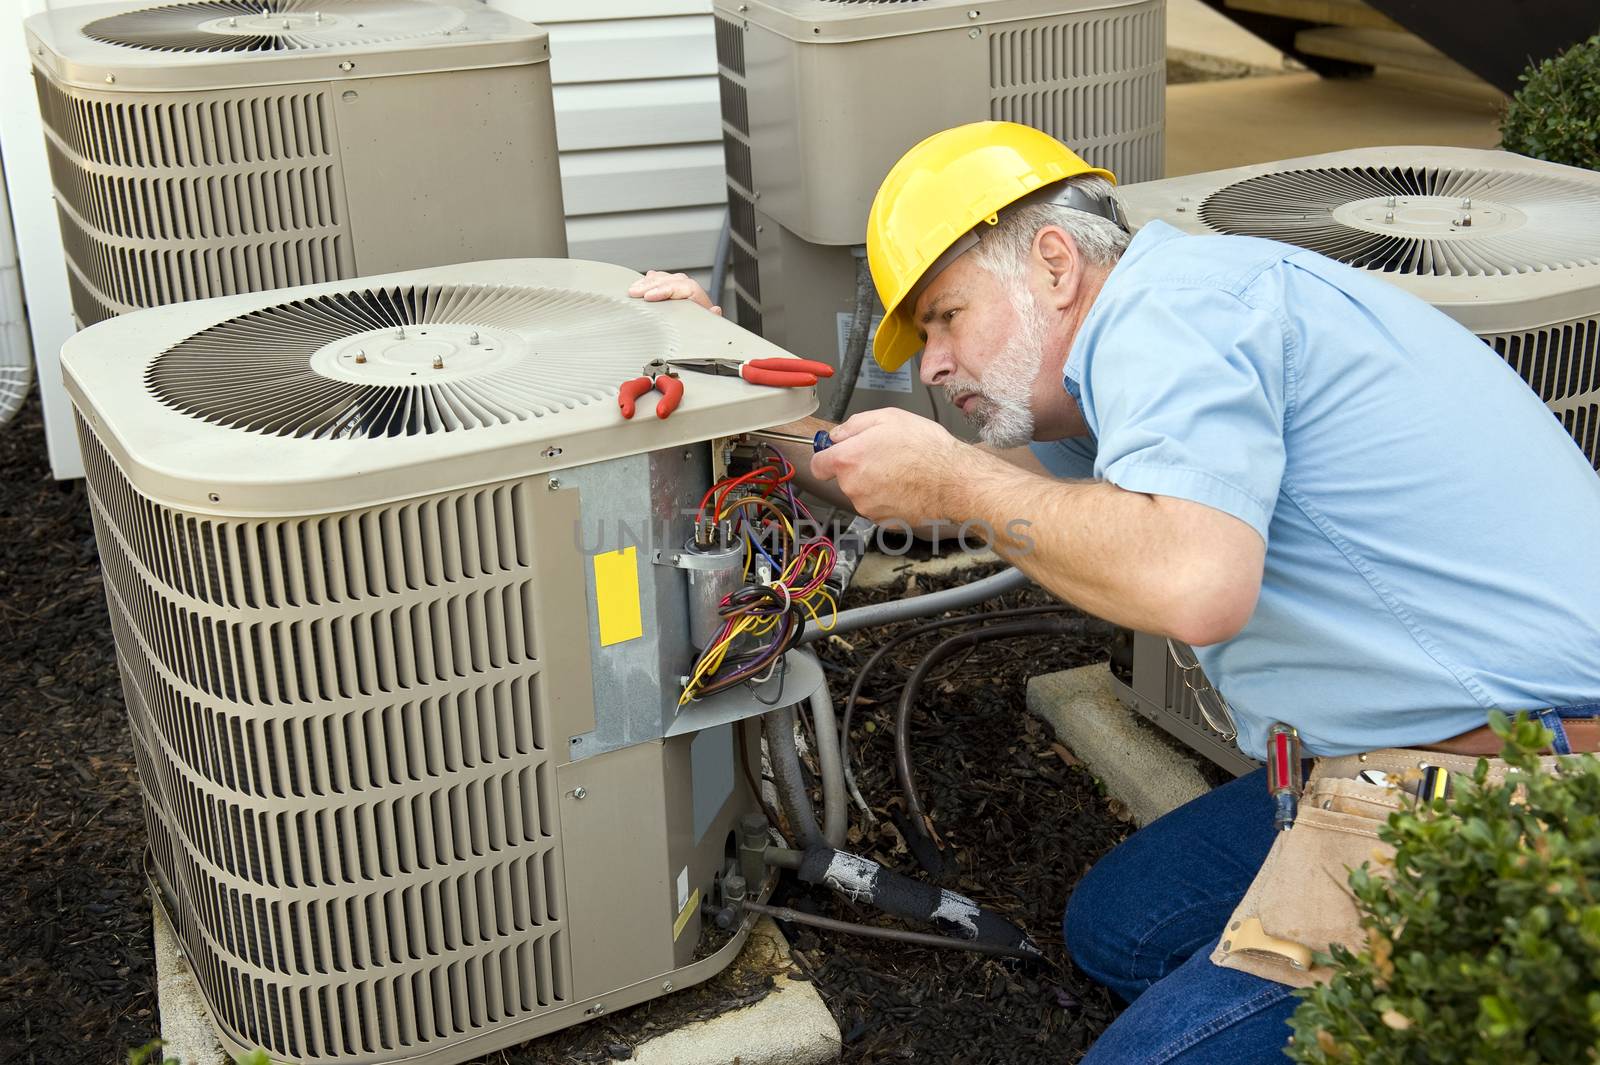 Worker repairing air conditioning unit at apartment complex